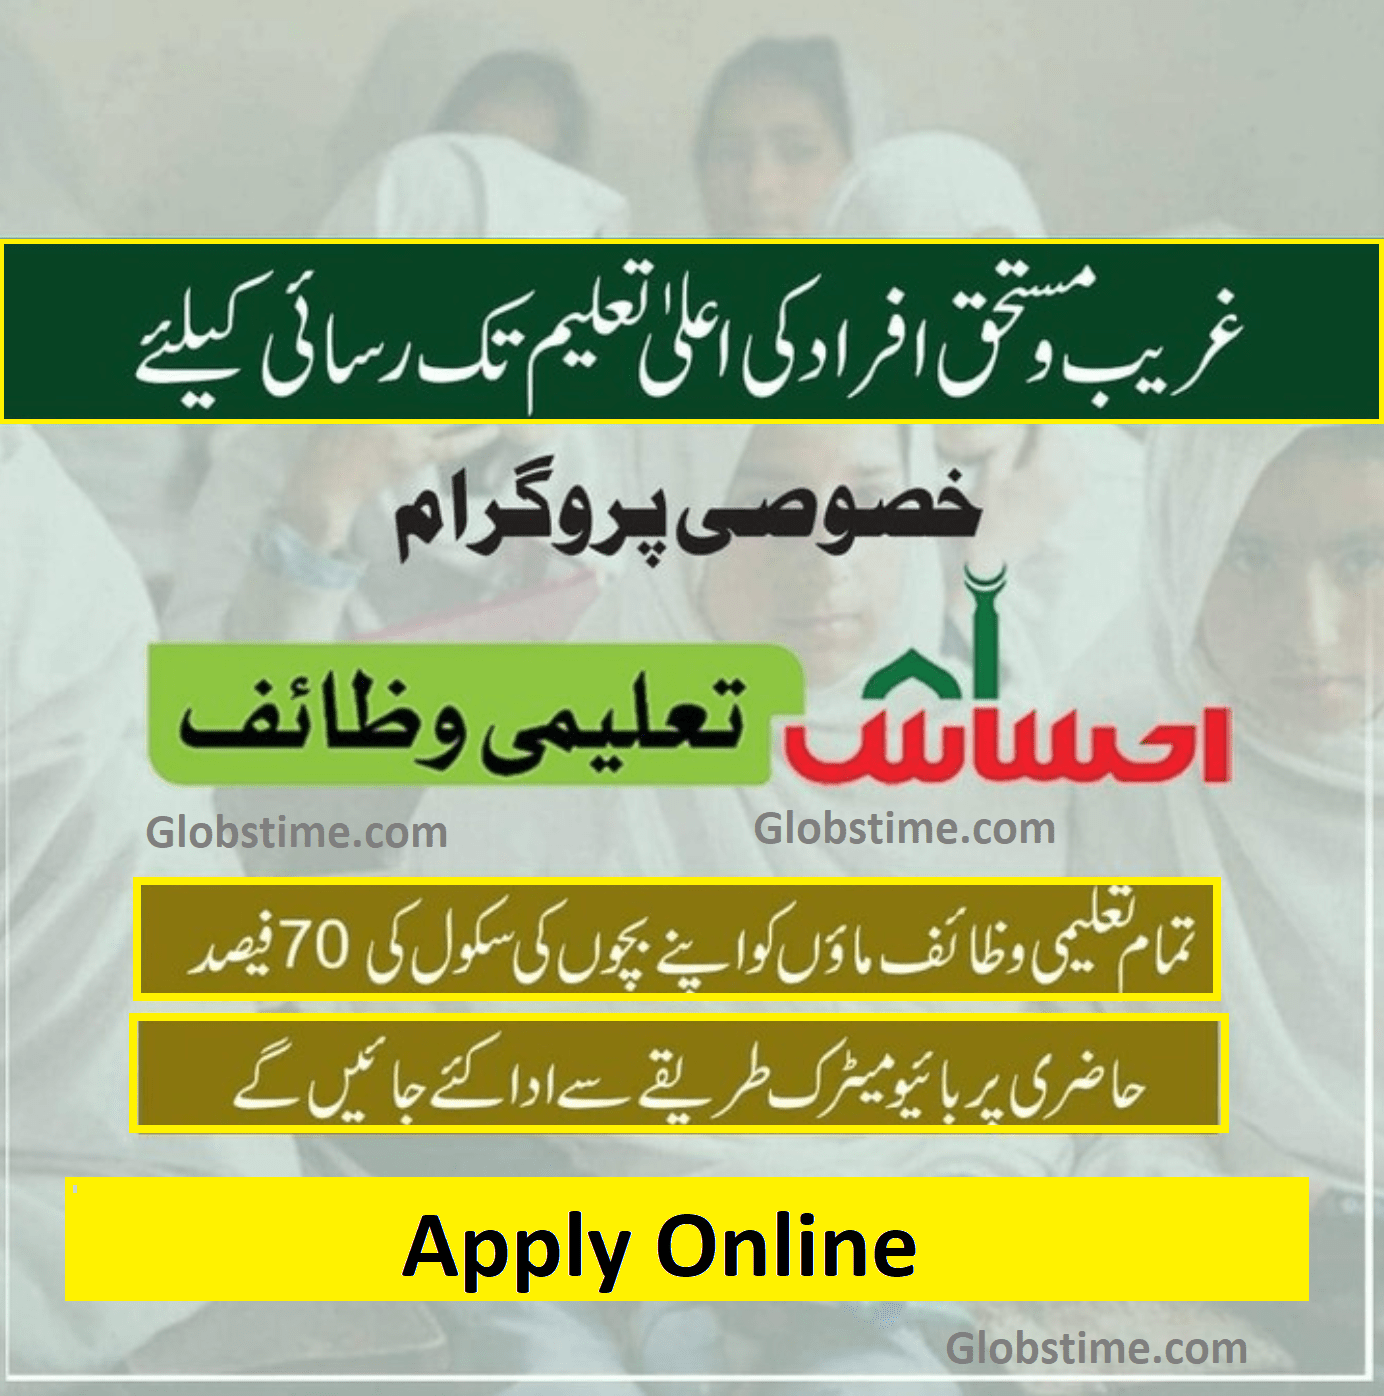 Ehsaas Taleemi Wazaif Registration. Eligibility criteria for Ehsaas Scholarship Registration 2023 and find out if you are eligible to apply.